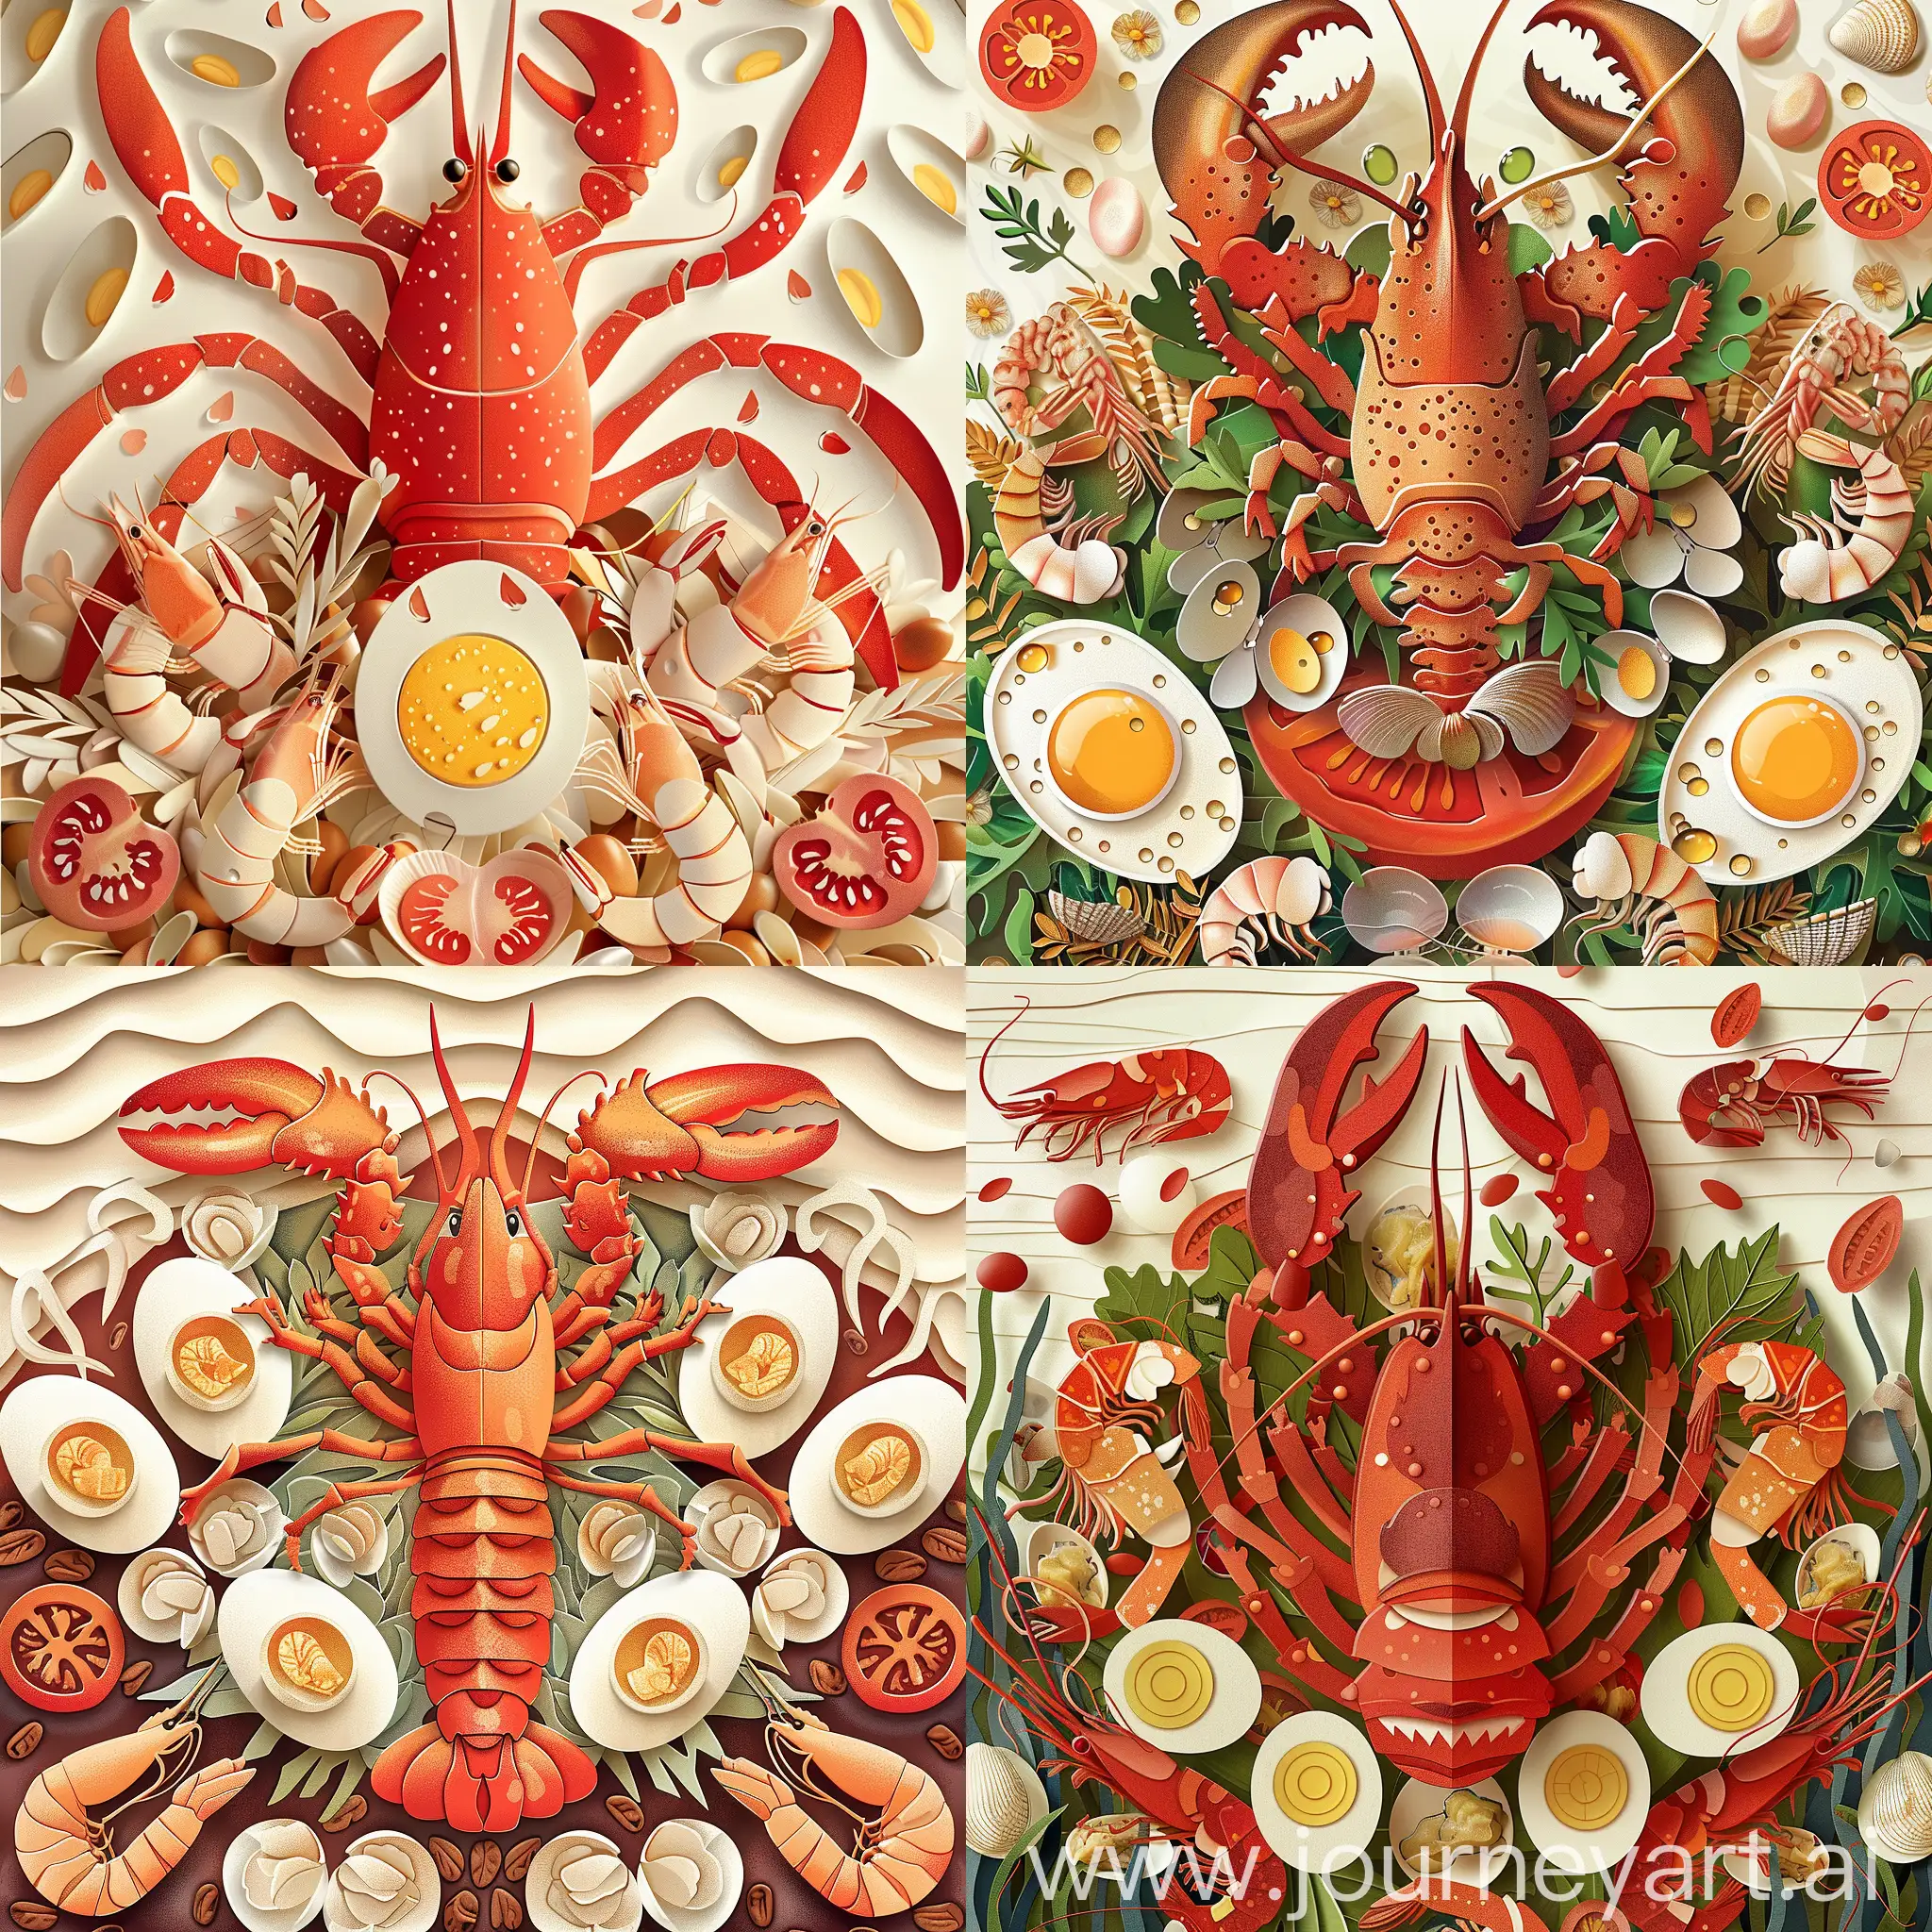 Exquisite-Cut-Paper-Salad-Art-with-Lobster-Shrimp-and-Clams